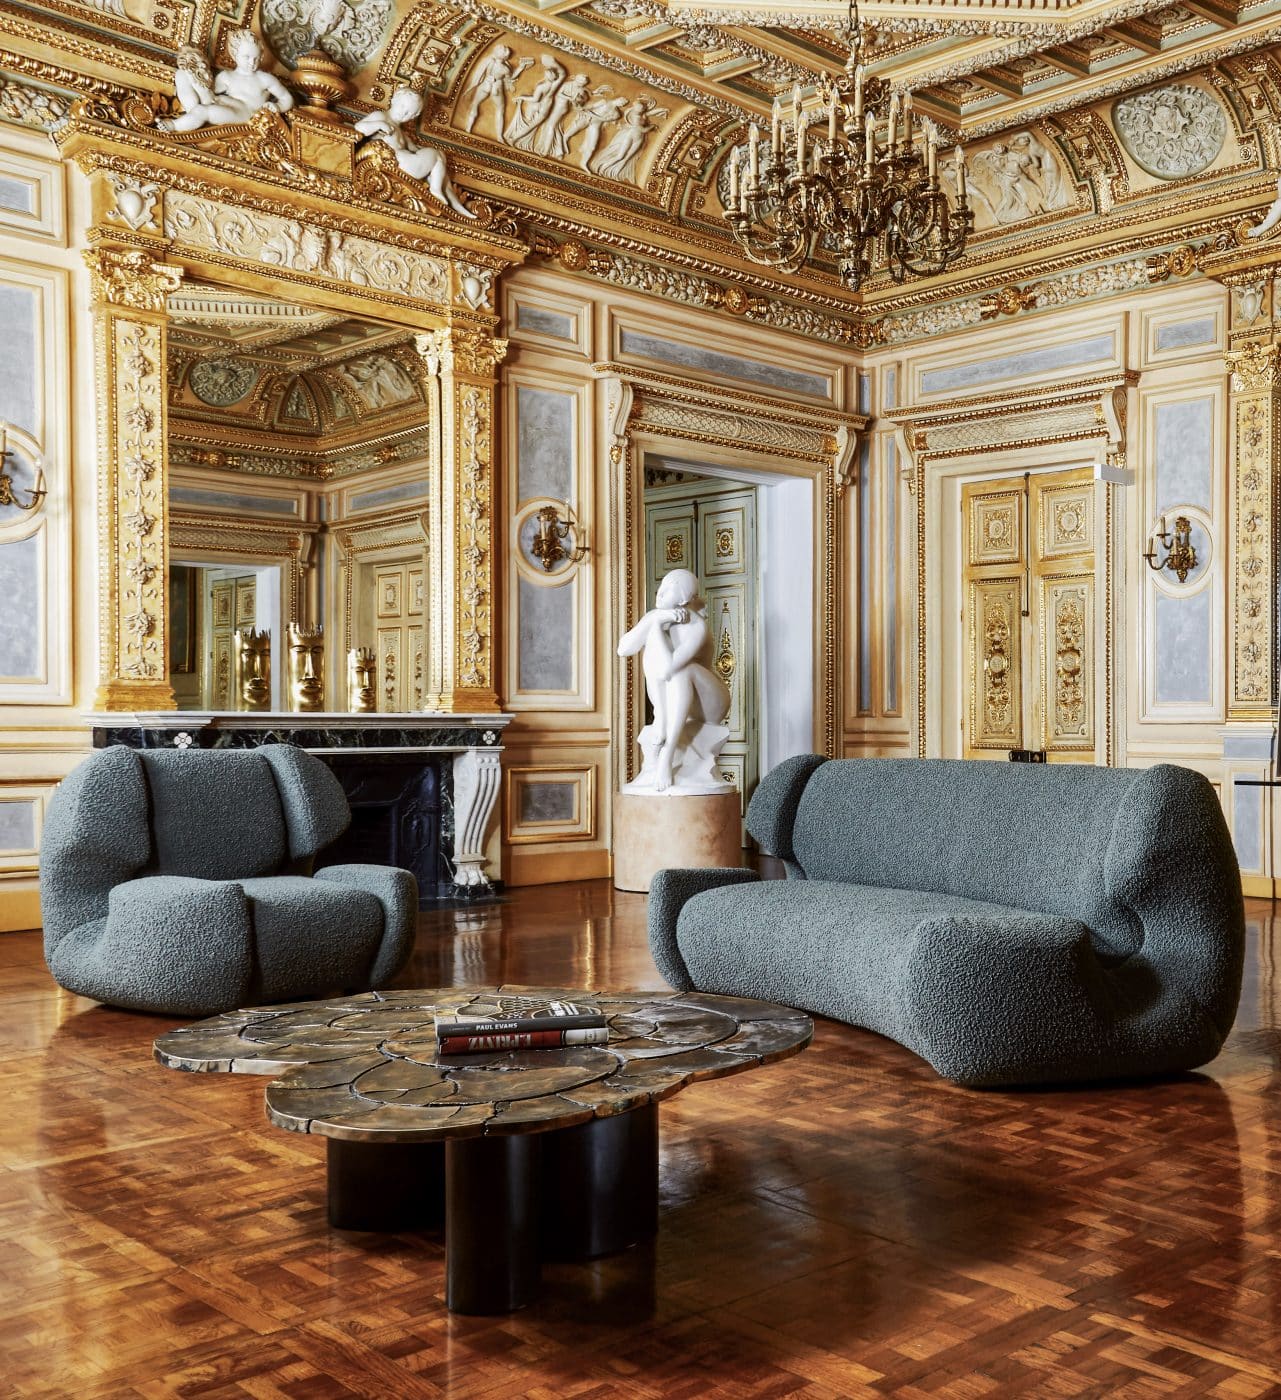 The modern forms of Studio Glustin's Colisée chair and sofa ground the ornate decor at the Palais Vivienne, a Paris exhibition space. 